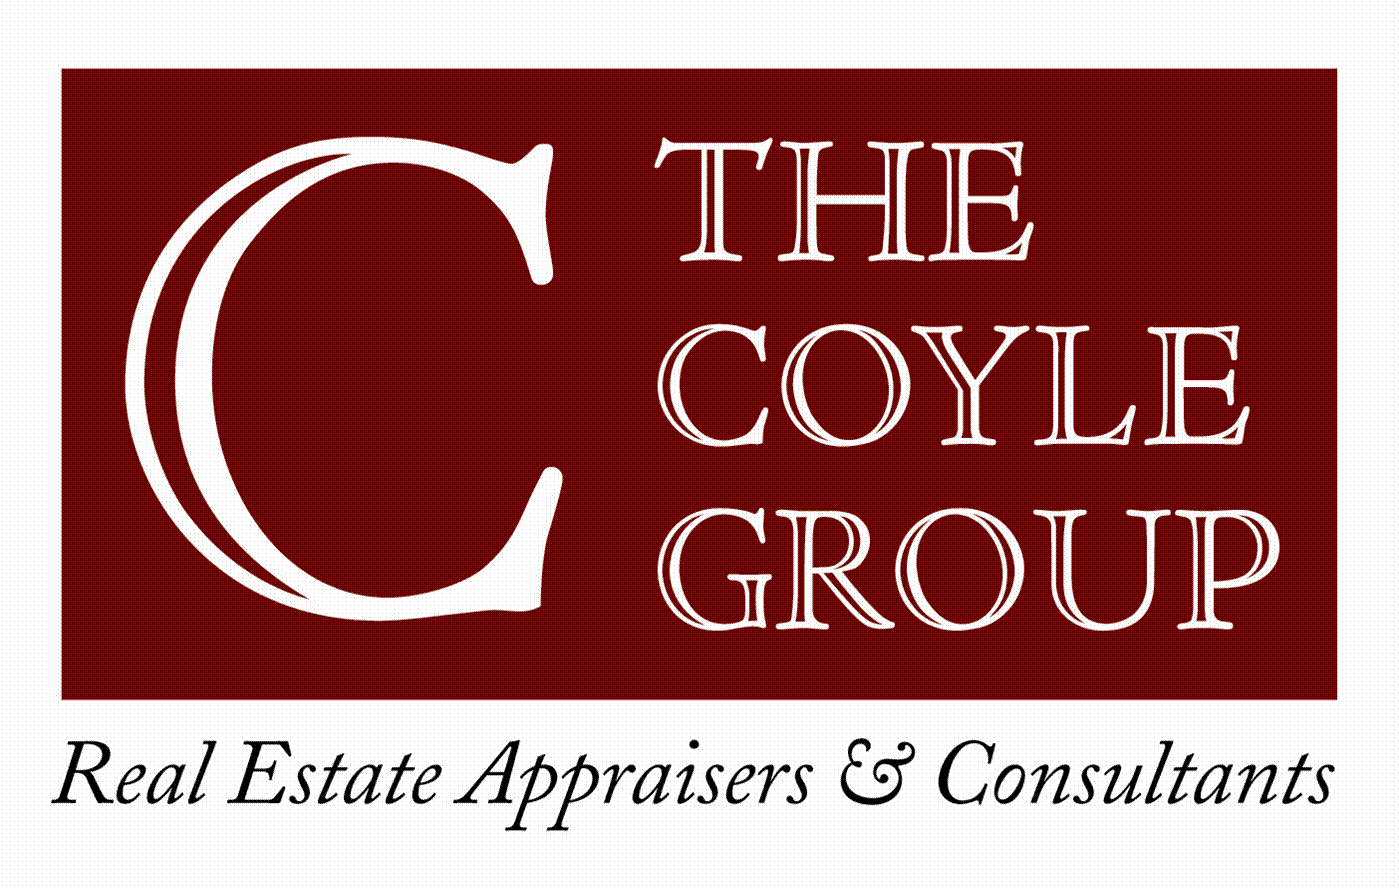 The Coyle Group